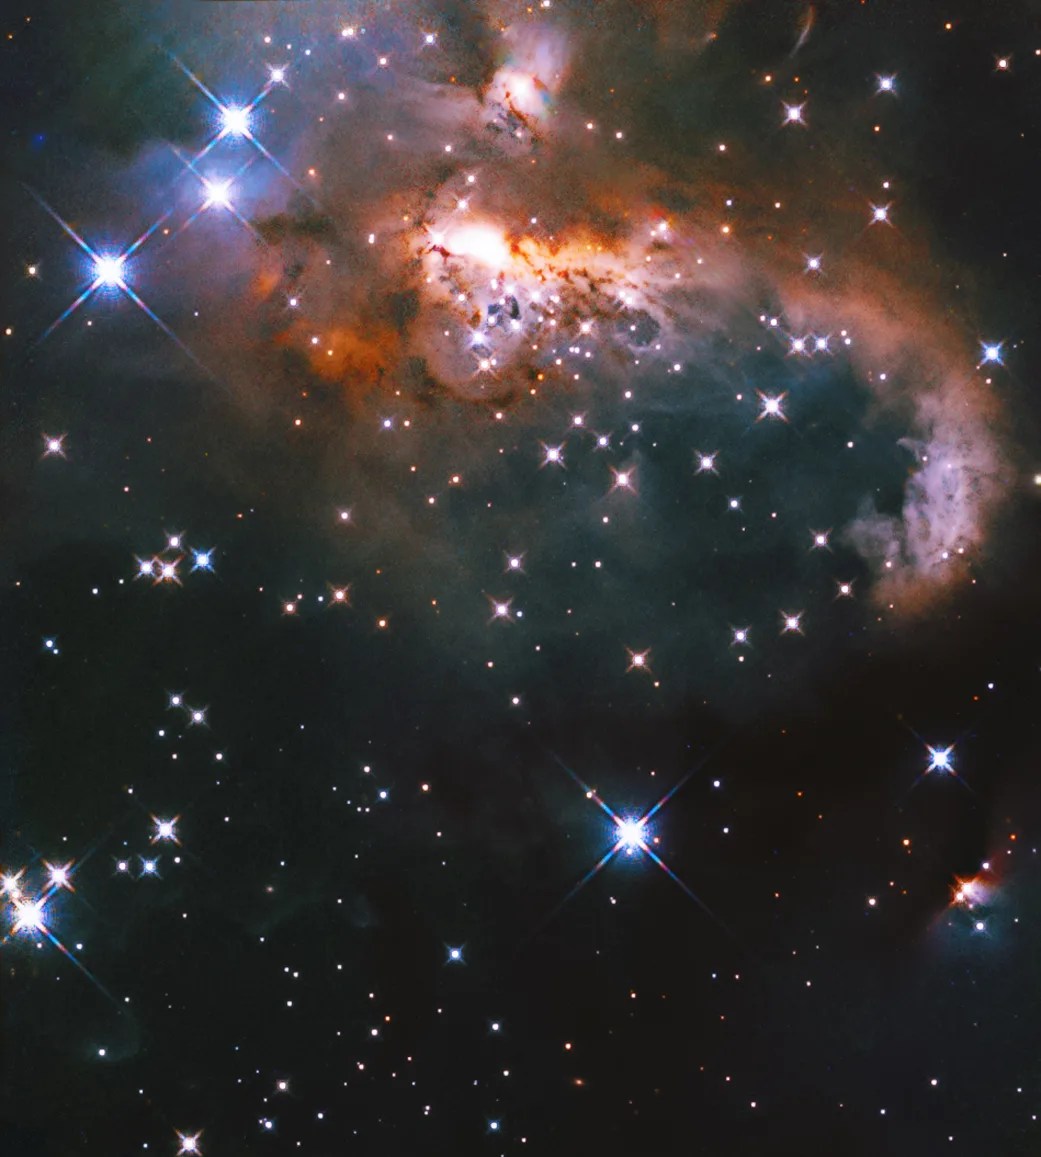 3 bright, blue-white stars at upper left mark the beginning of a bright and dusty reddish-brown, orange, and white